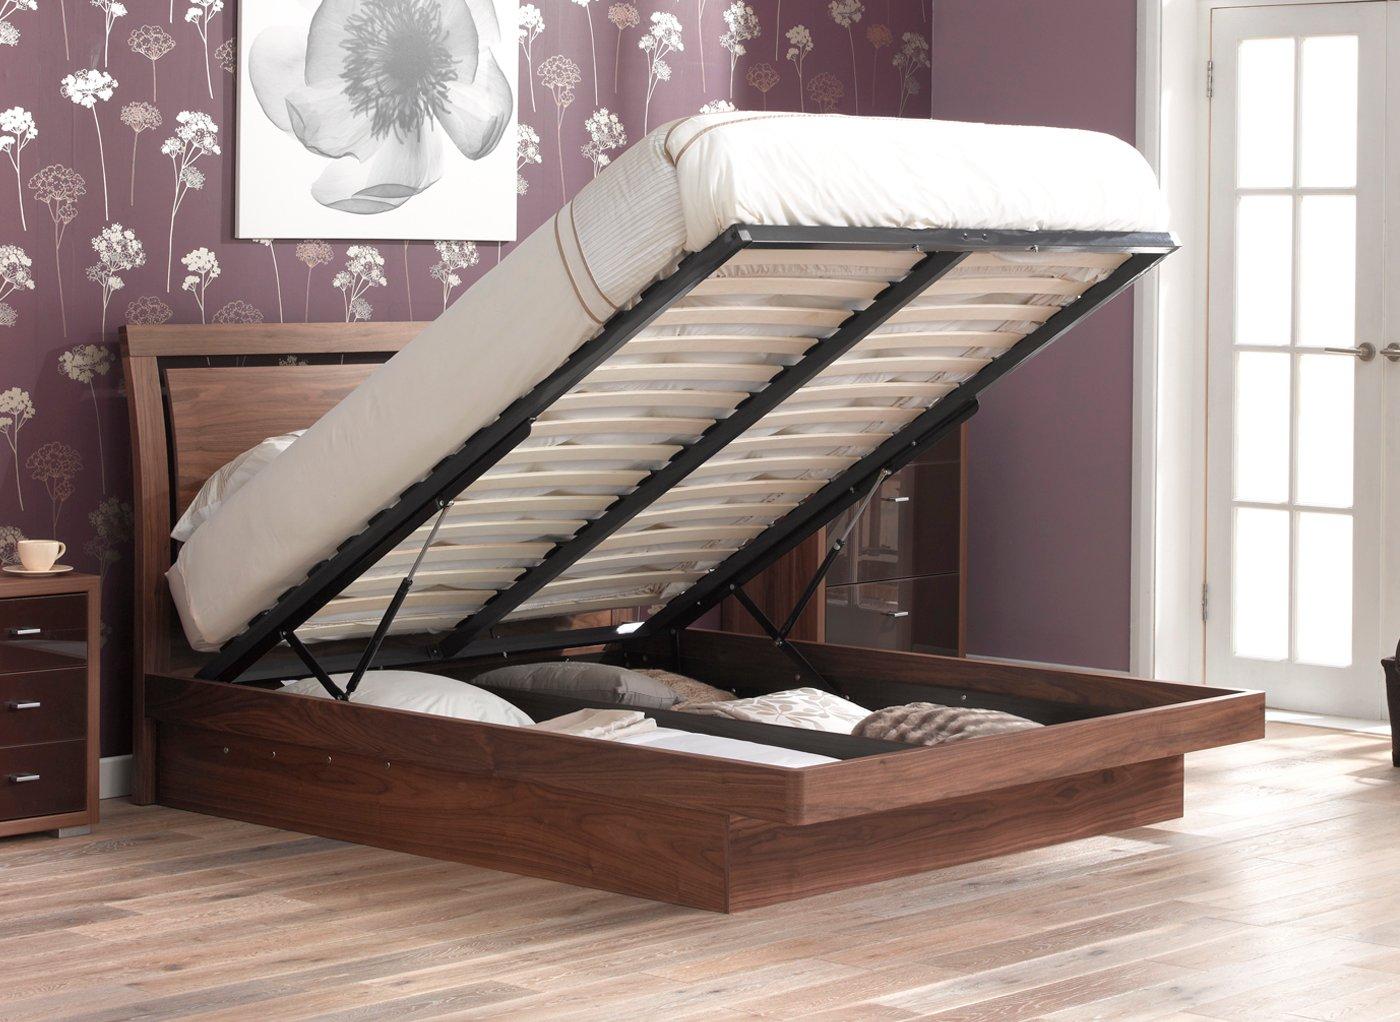 ottoman beds with mattress and headboard